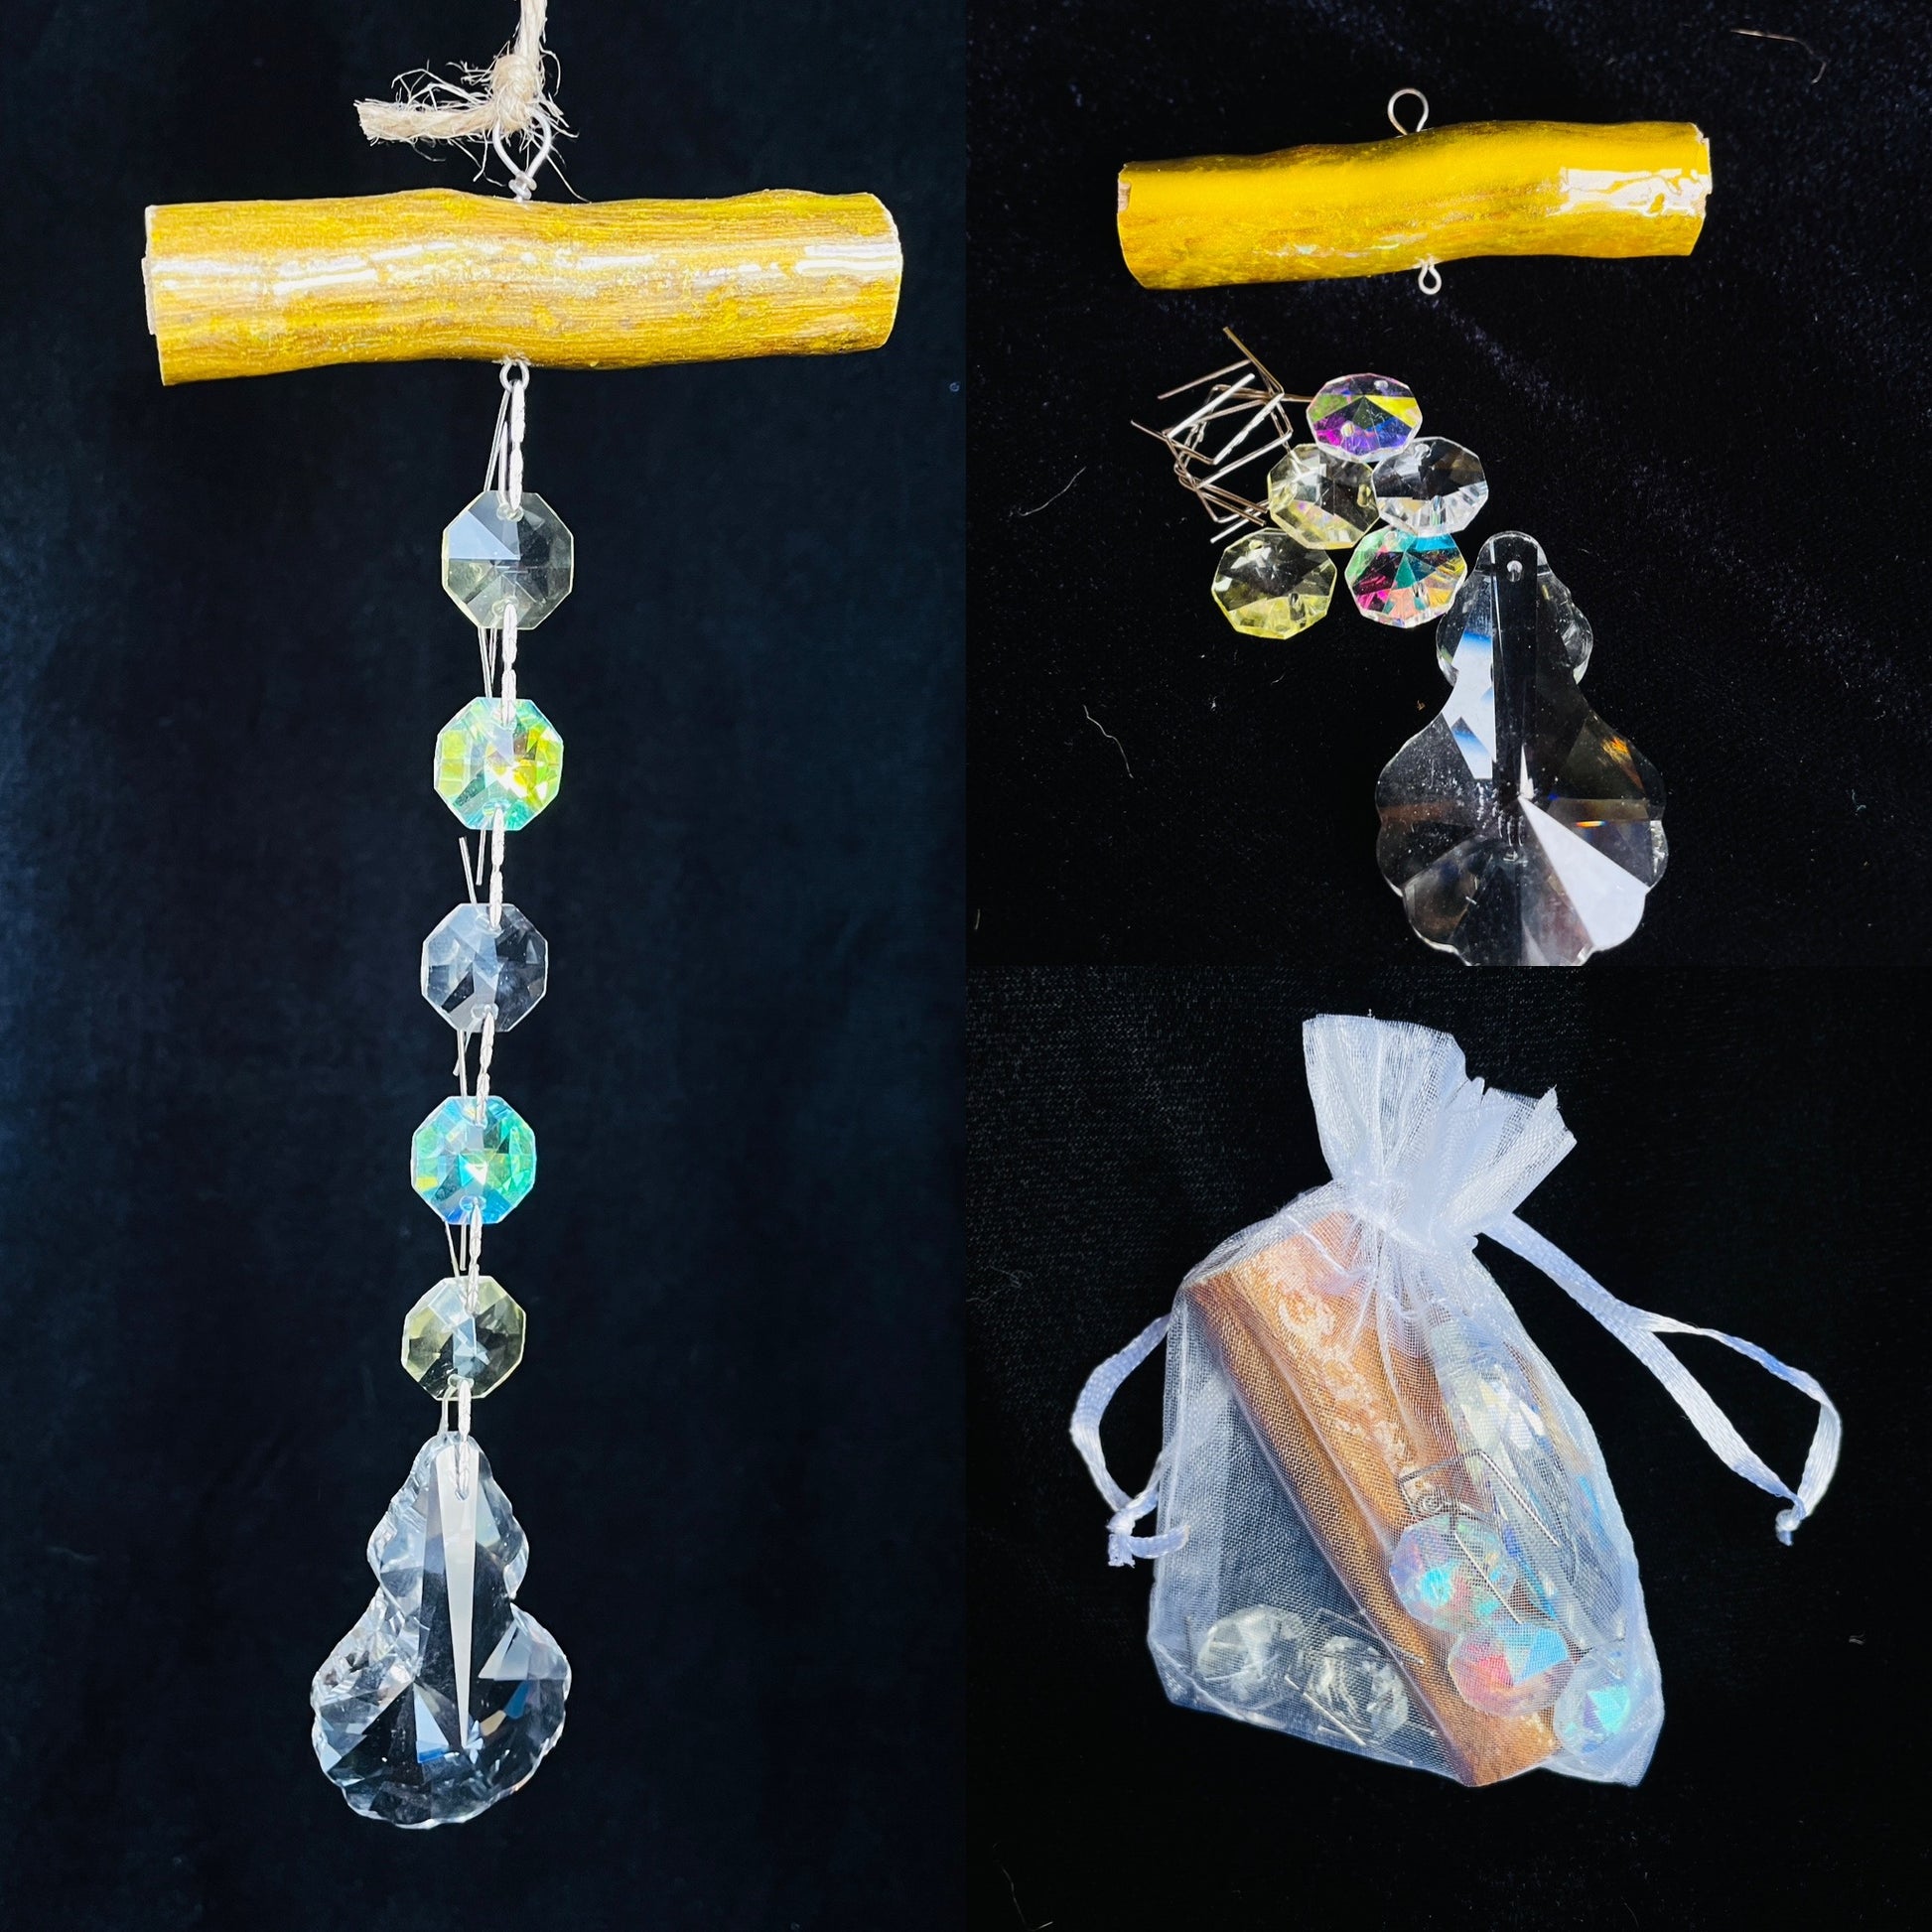 DIY Suncatcher made from Driftwood, epoxy resin, and crystal prisms